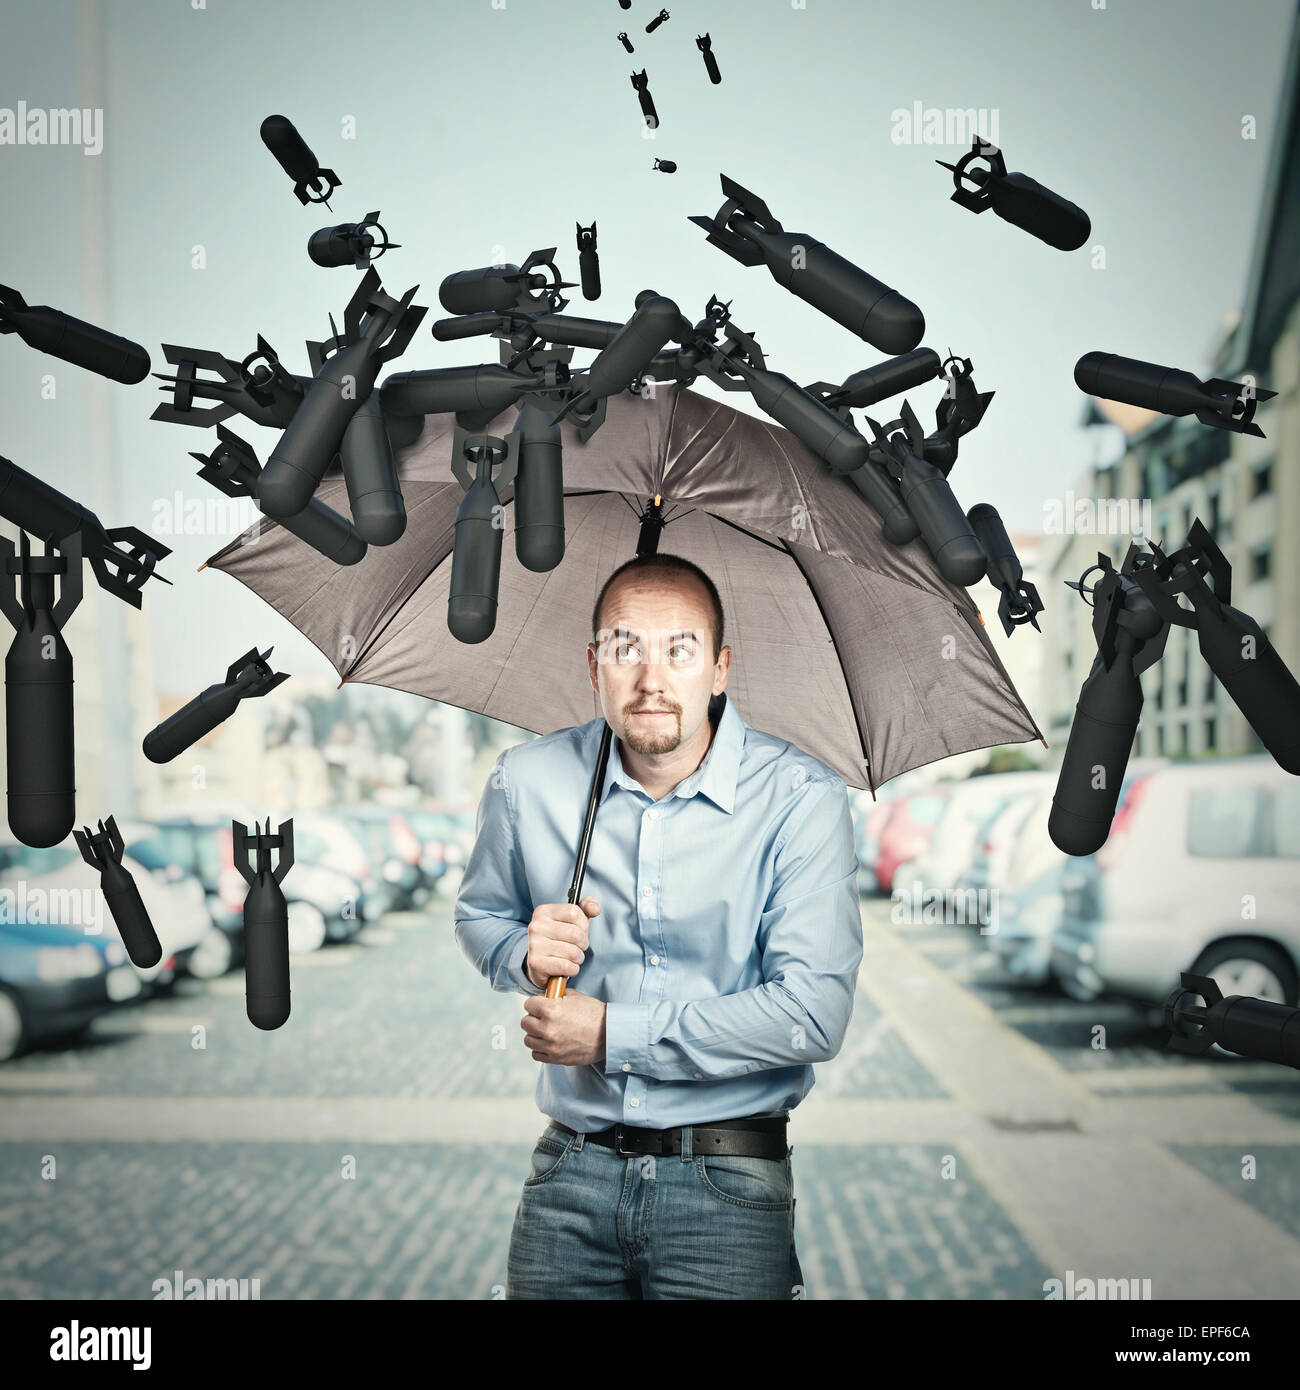 bombs and man try shield himself with umbrella Stock Photo